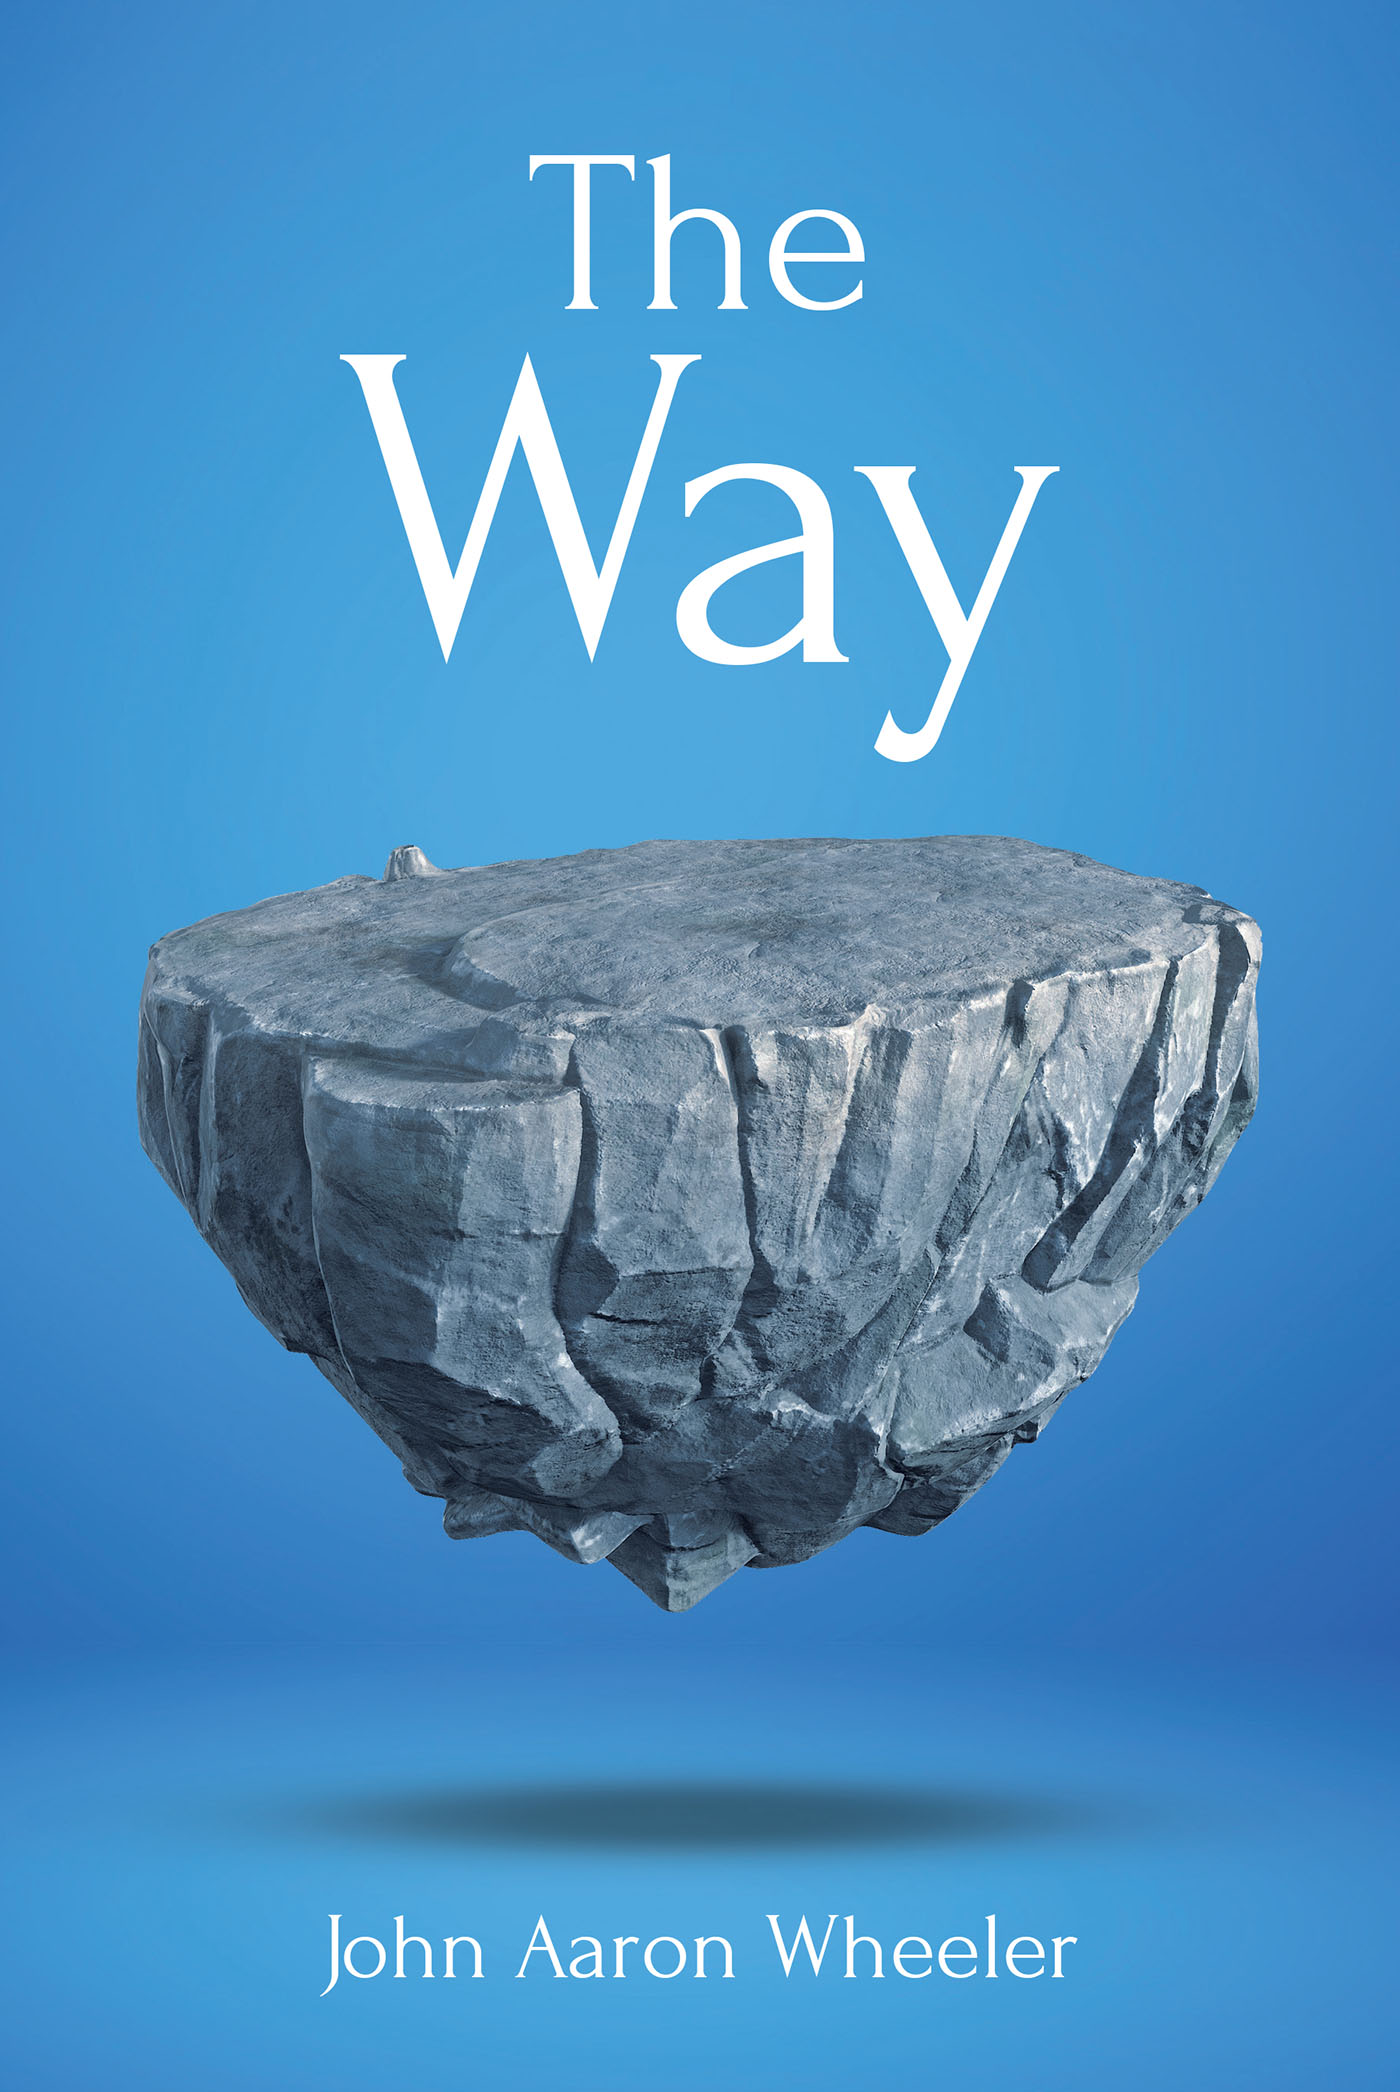 John Aaron Wheeler’s Newly Released "The Way" is an Intuitive Exploration of Key Scripture as Related to Persistent Questions Related to Faith